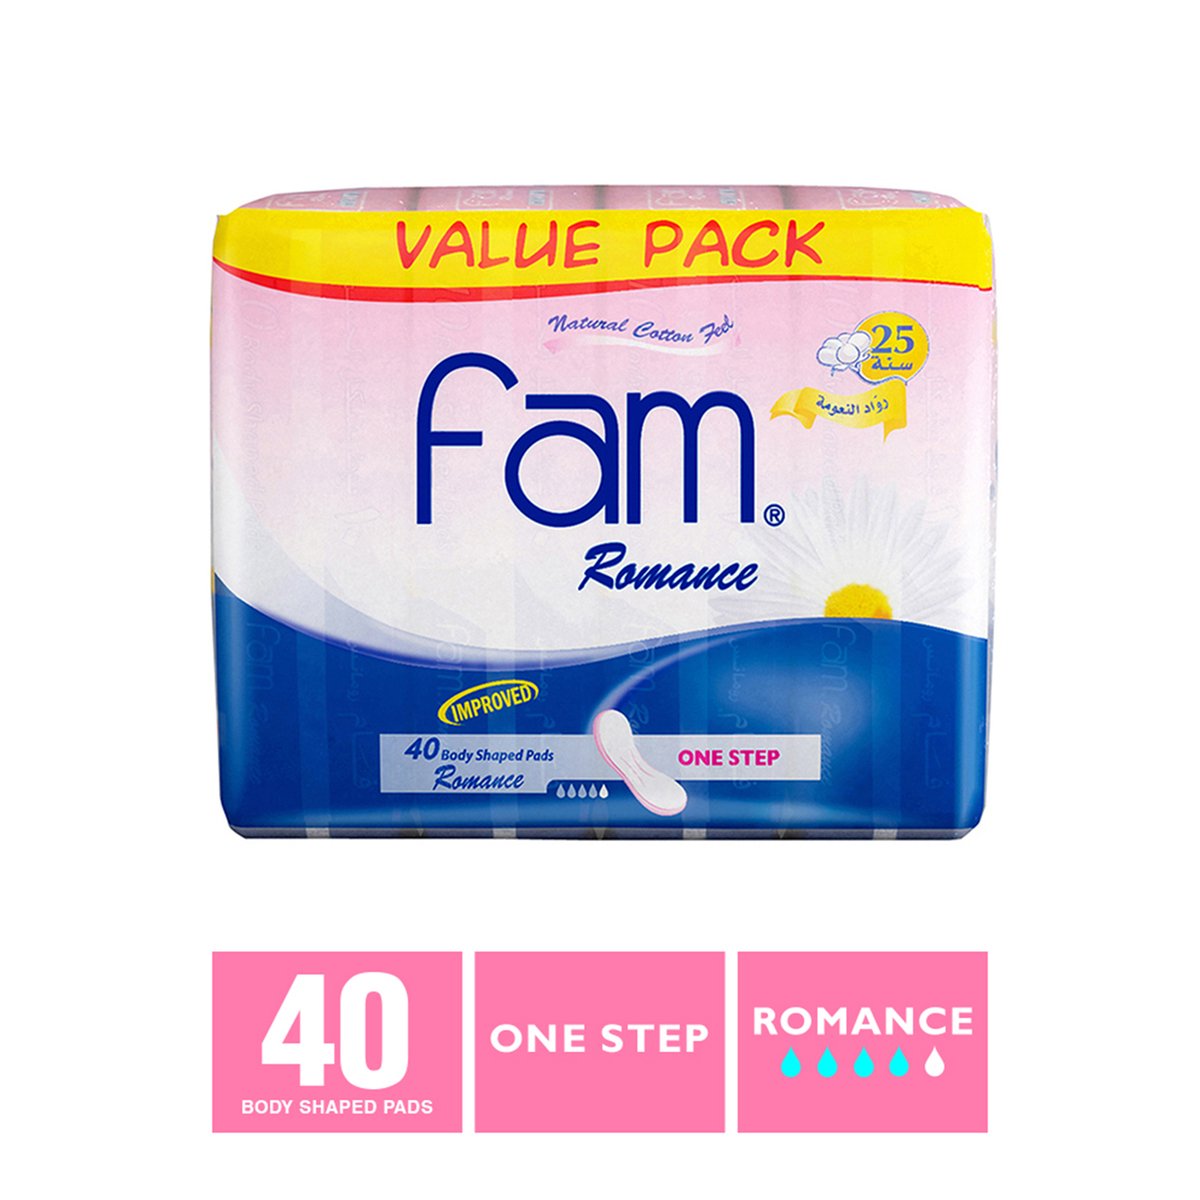 Buy FAM FEMININE PADS SUPER WITHOUT WINGS X30 Online